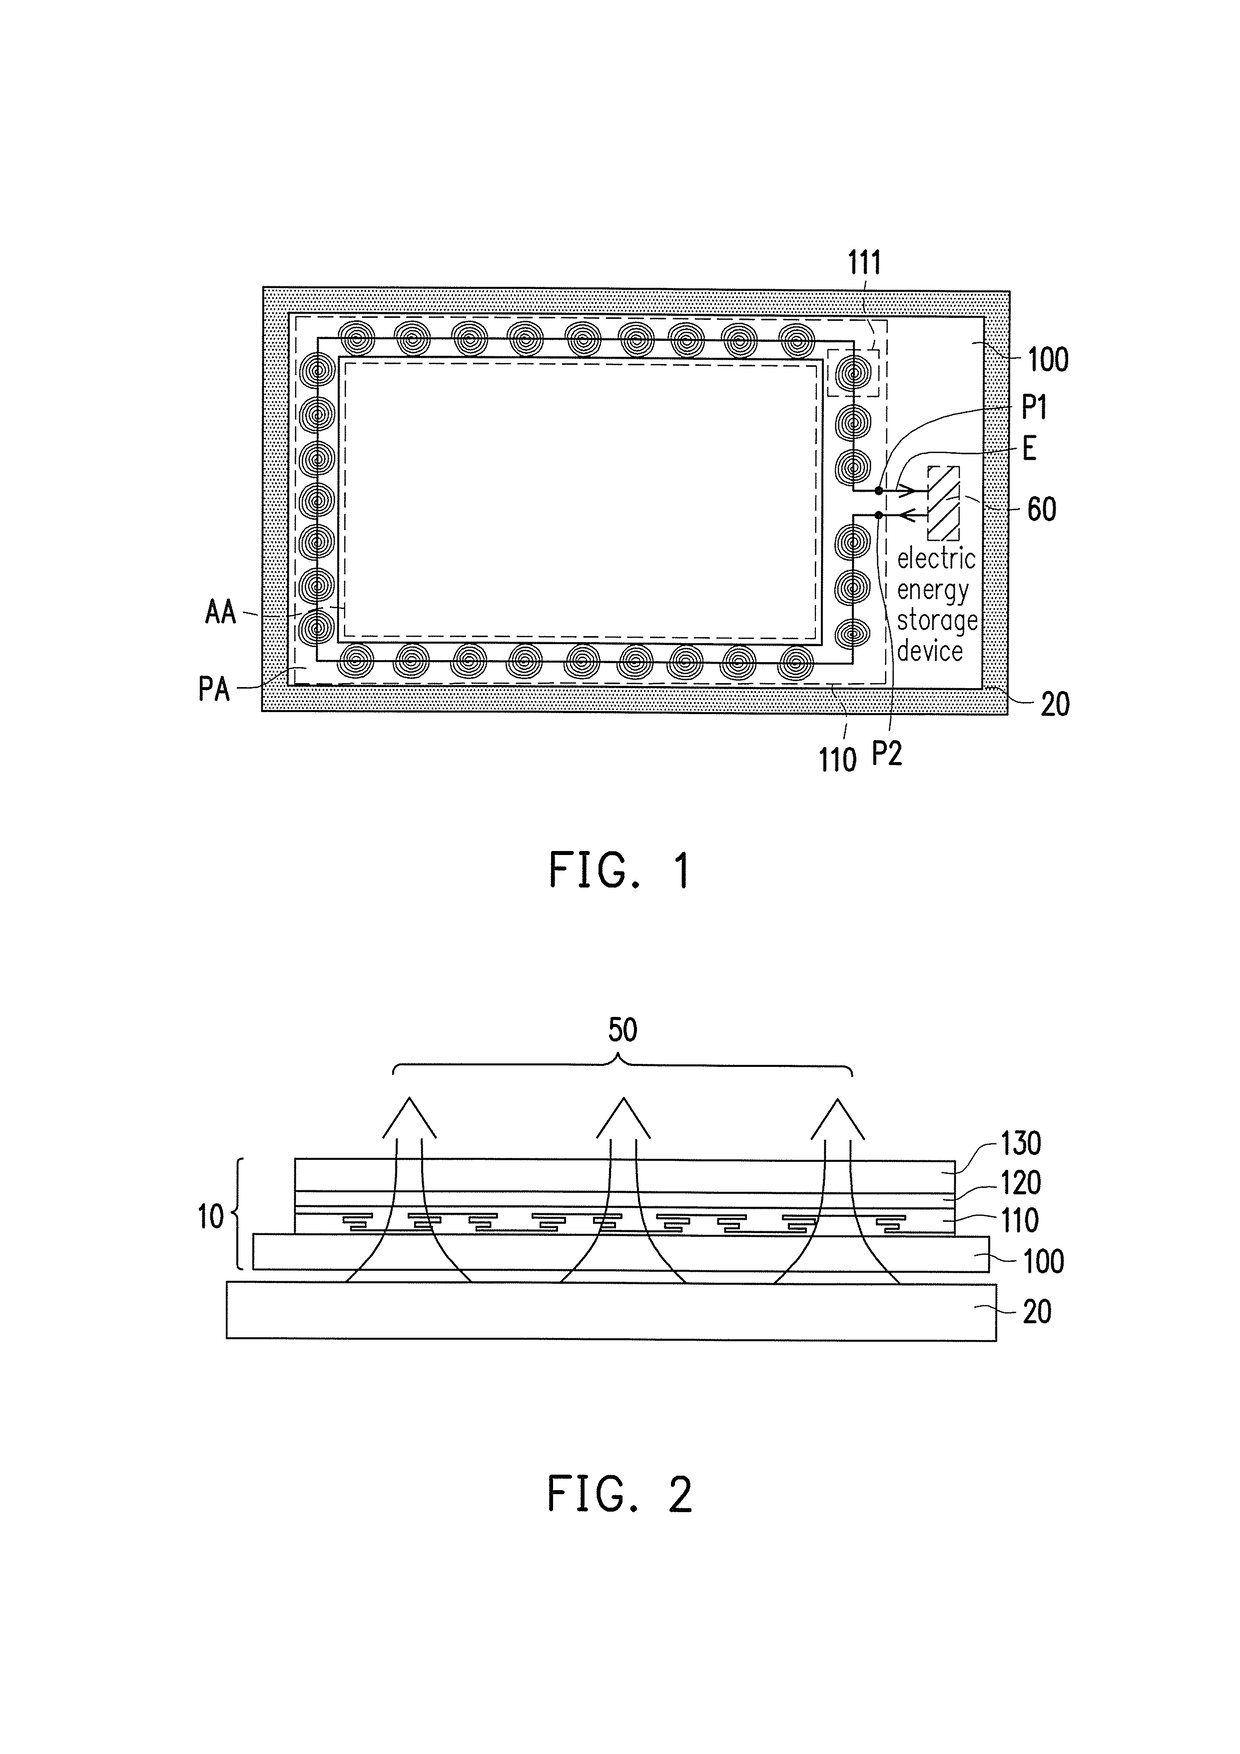 Display panel with coil layer for wireless charging